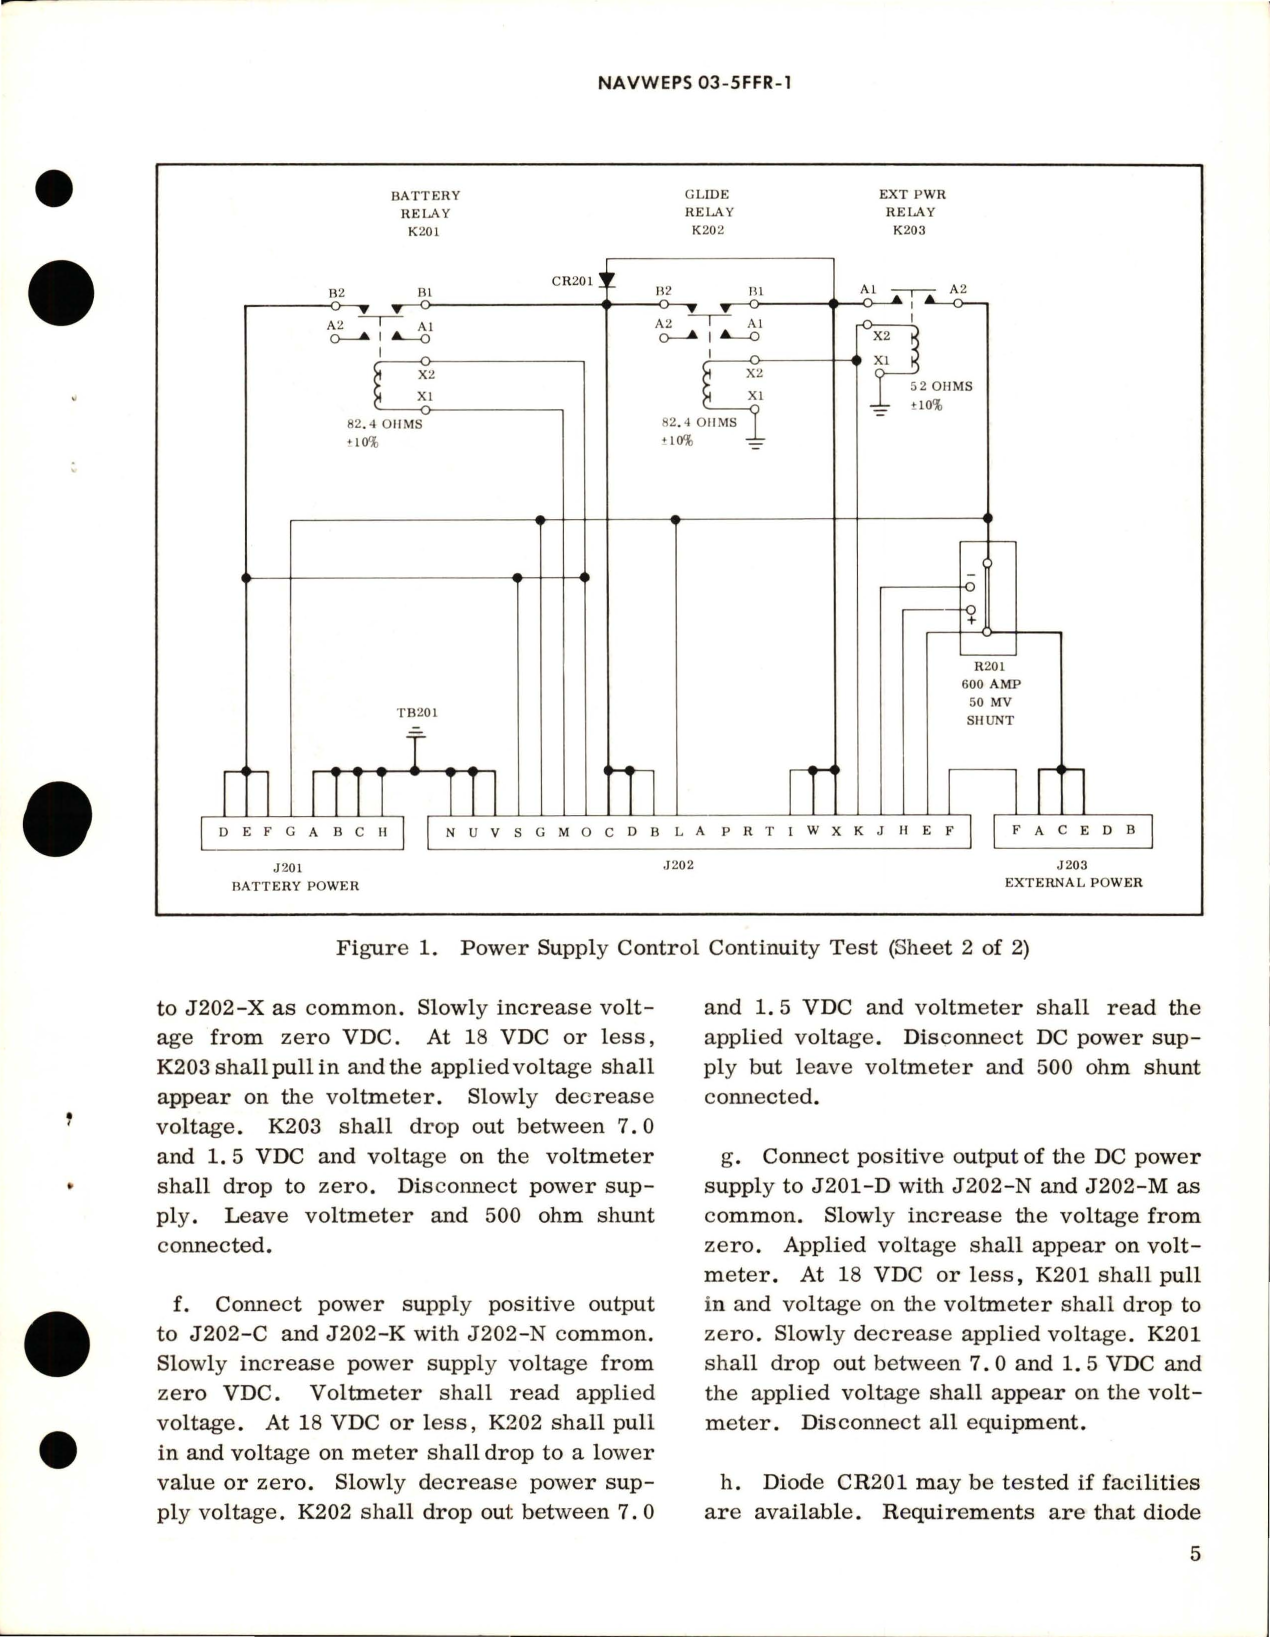 Sample page 5 from AirCorps Library document: Overhaul Instructions with Parts Breakdown for Power Supply Control - 124E374-1 